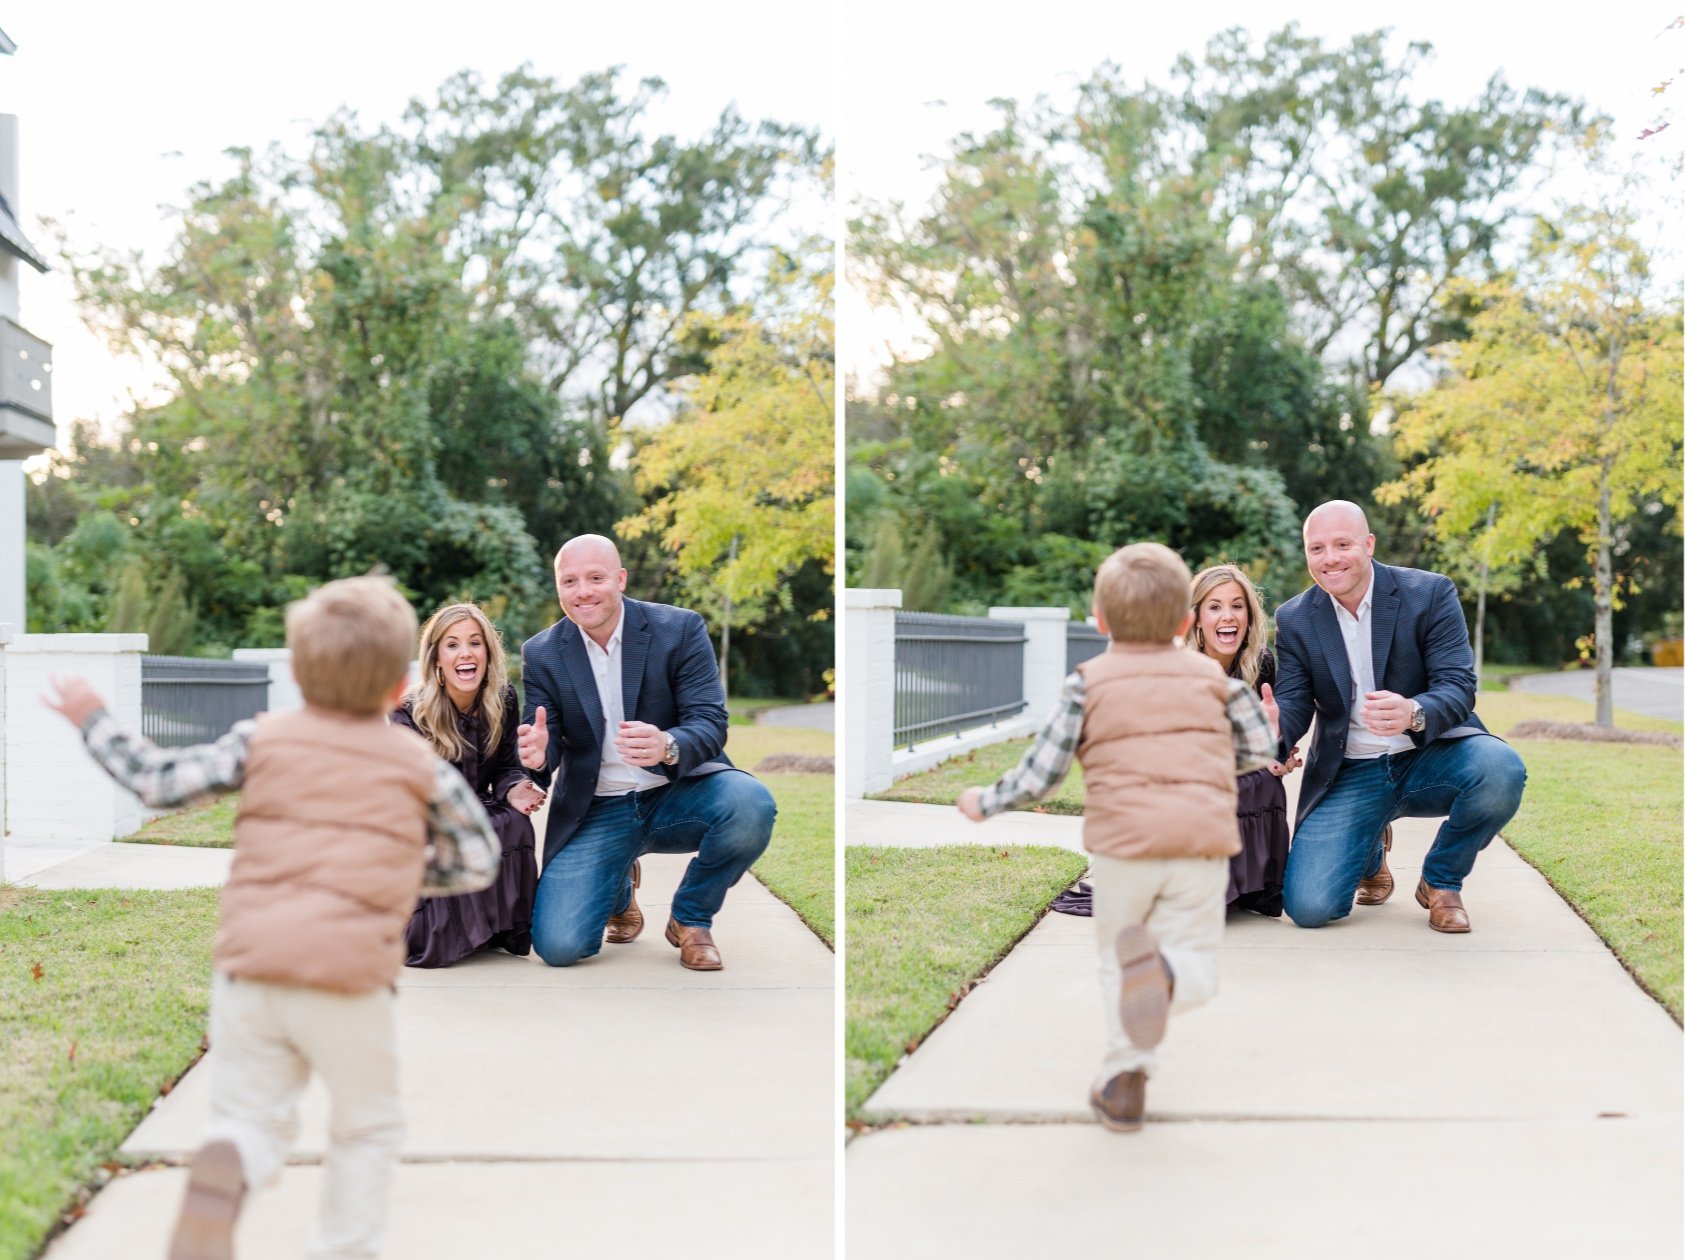 Fall Fairhope Family Photos in Knoll Park in October Photographed by Kristen Marcus Photography